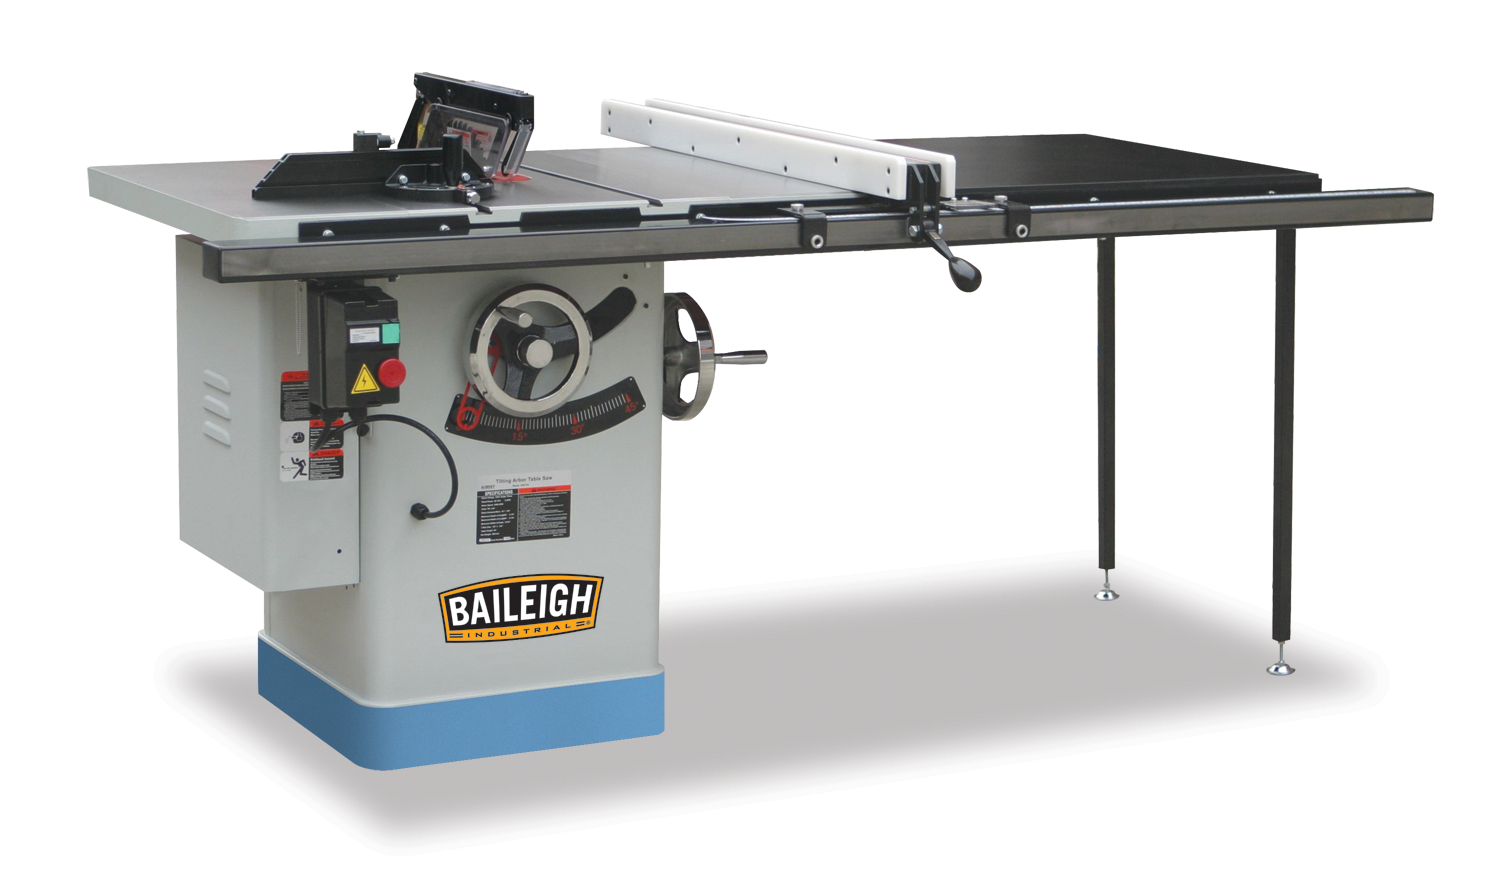 Baileigh TS-1040P-50-V2 3HP 220V 1 Phase, 10" Professional Cabinet Style Table Saw, 40" x 27" Table, 50" Max Rip Cut